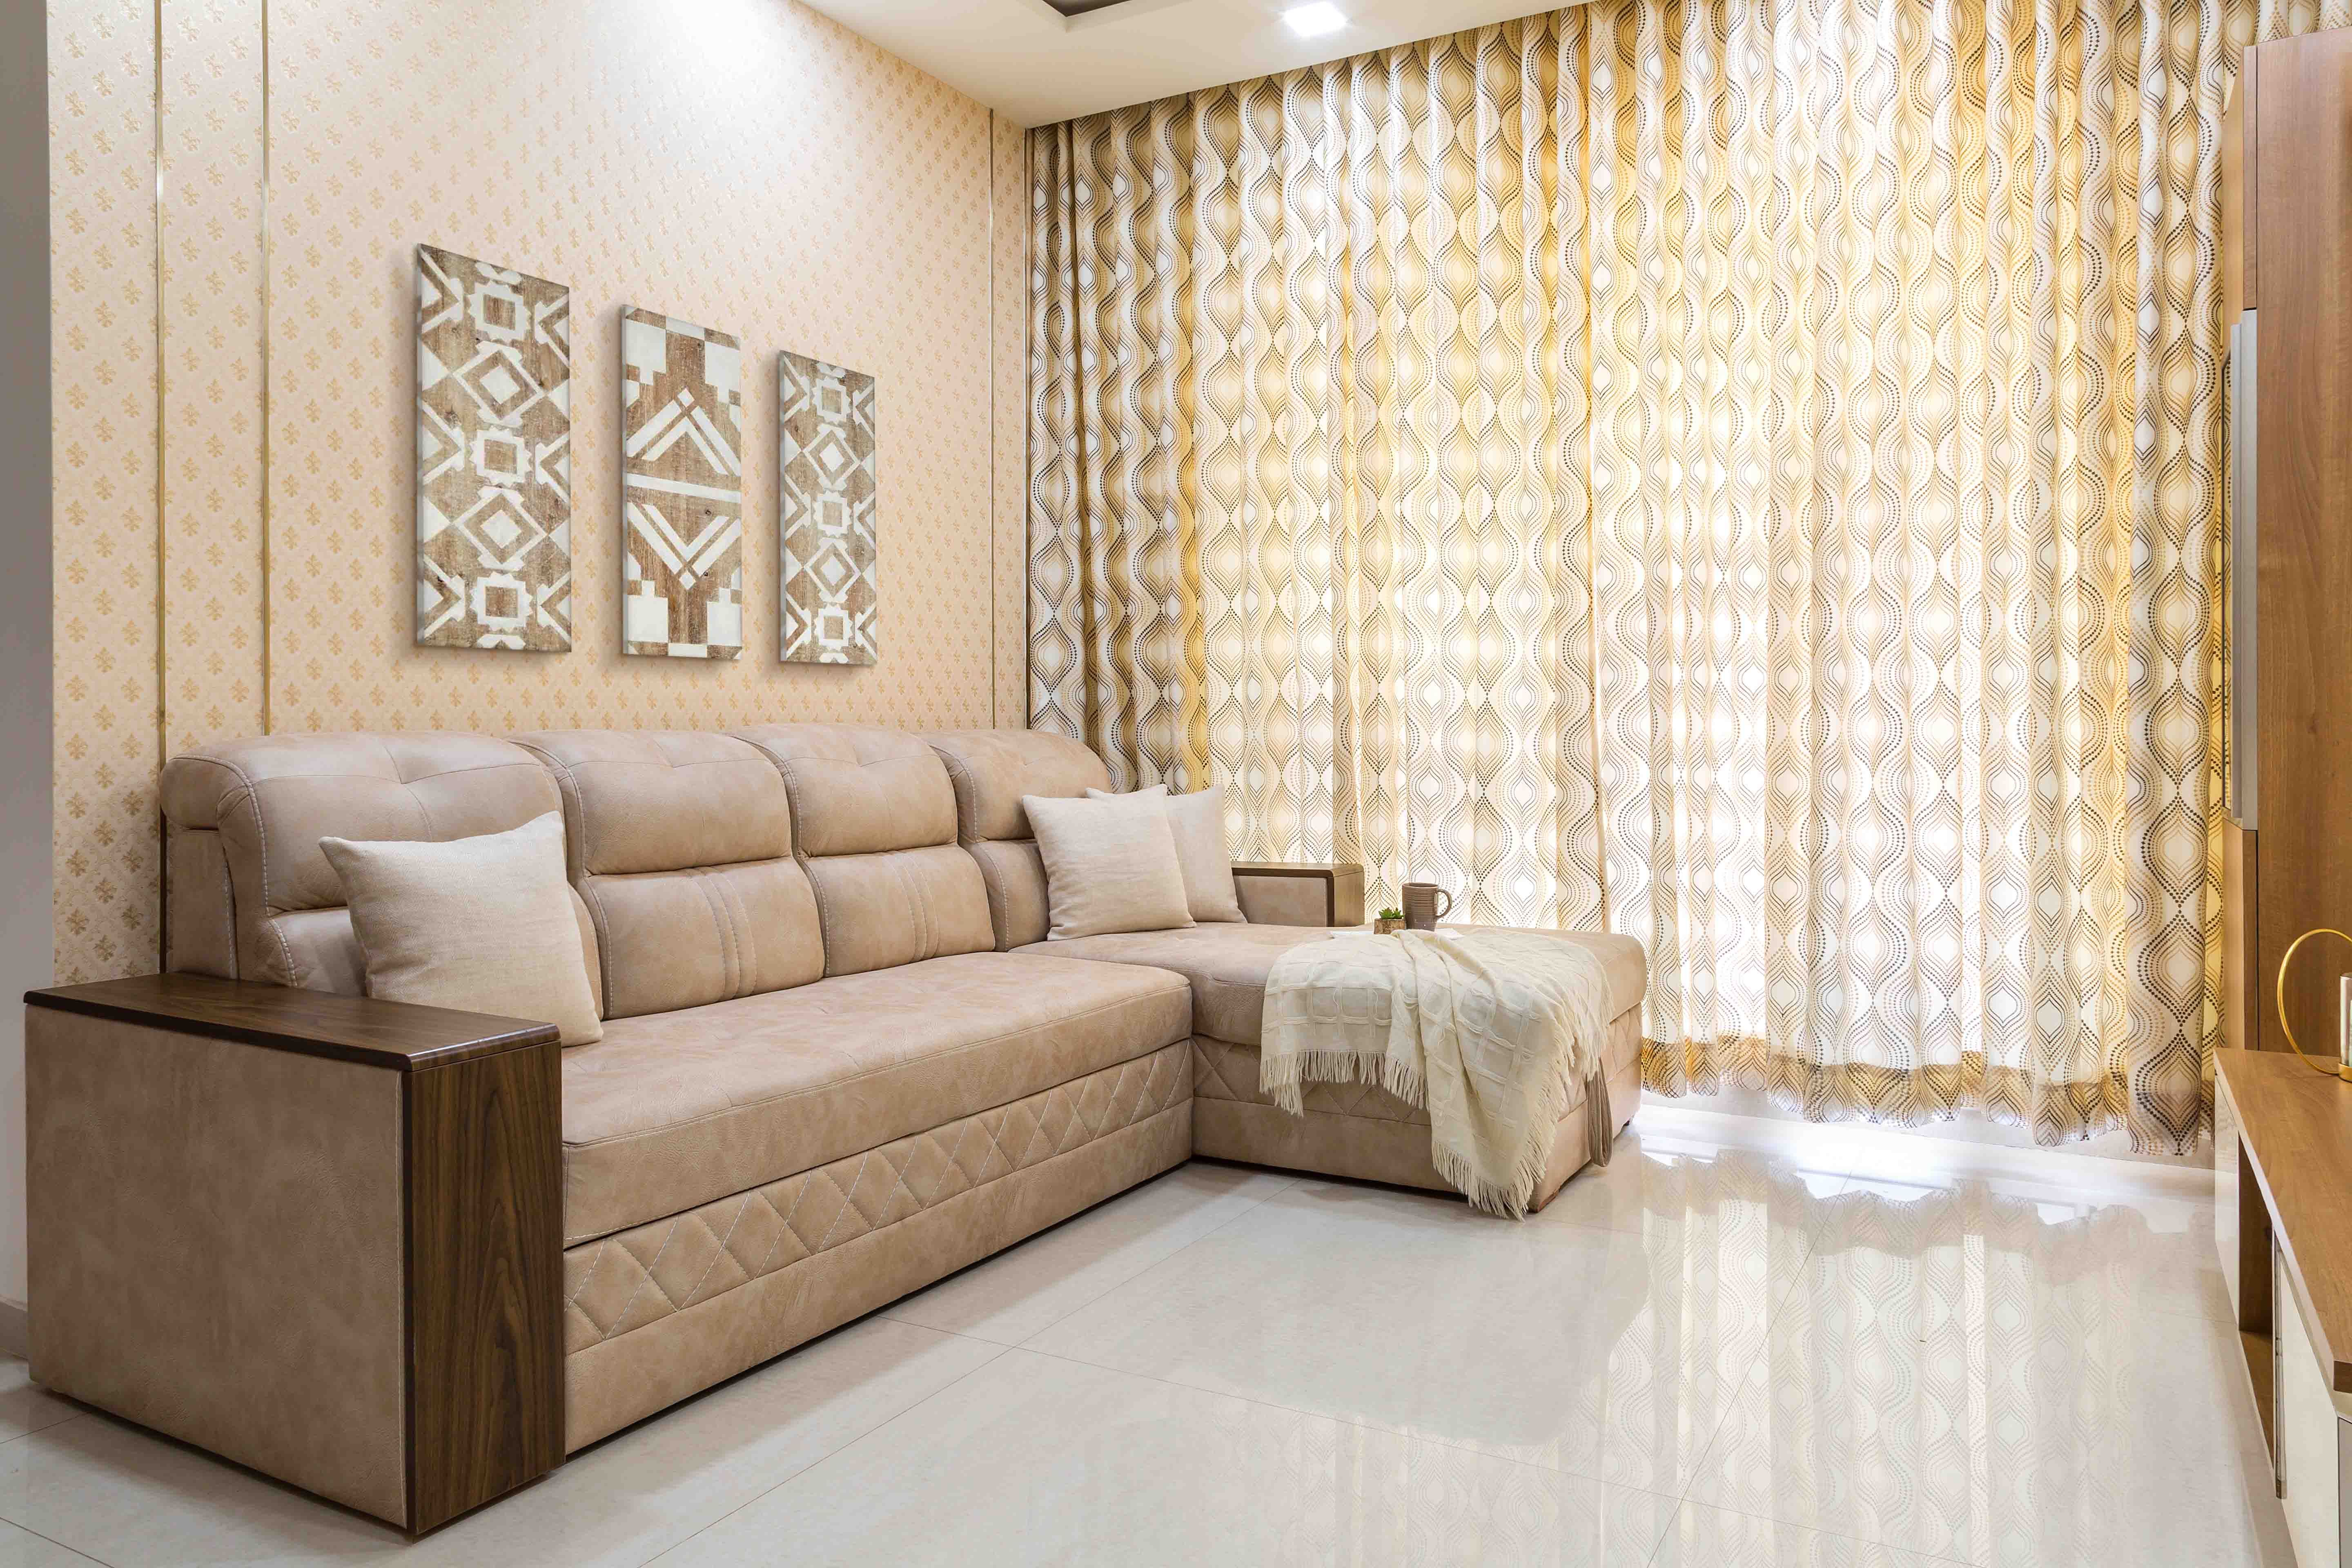 Modern Beige Living Room Design With Beige Patterned Wallpaper And Sectional Sofa